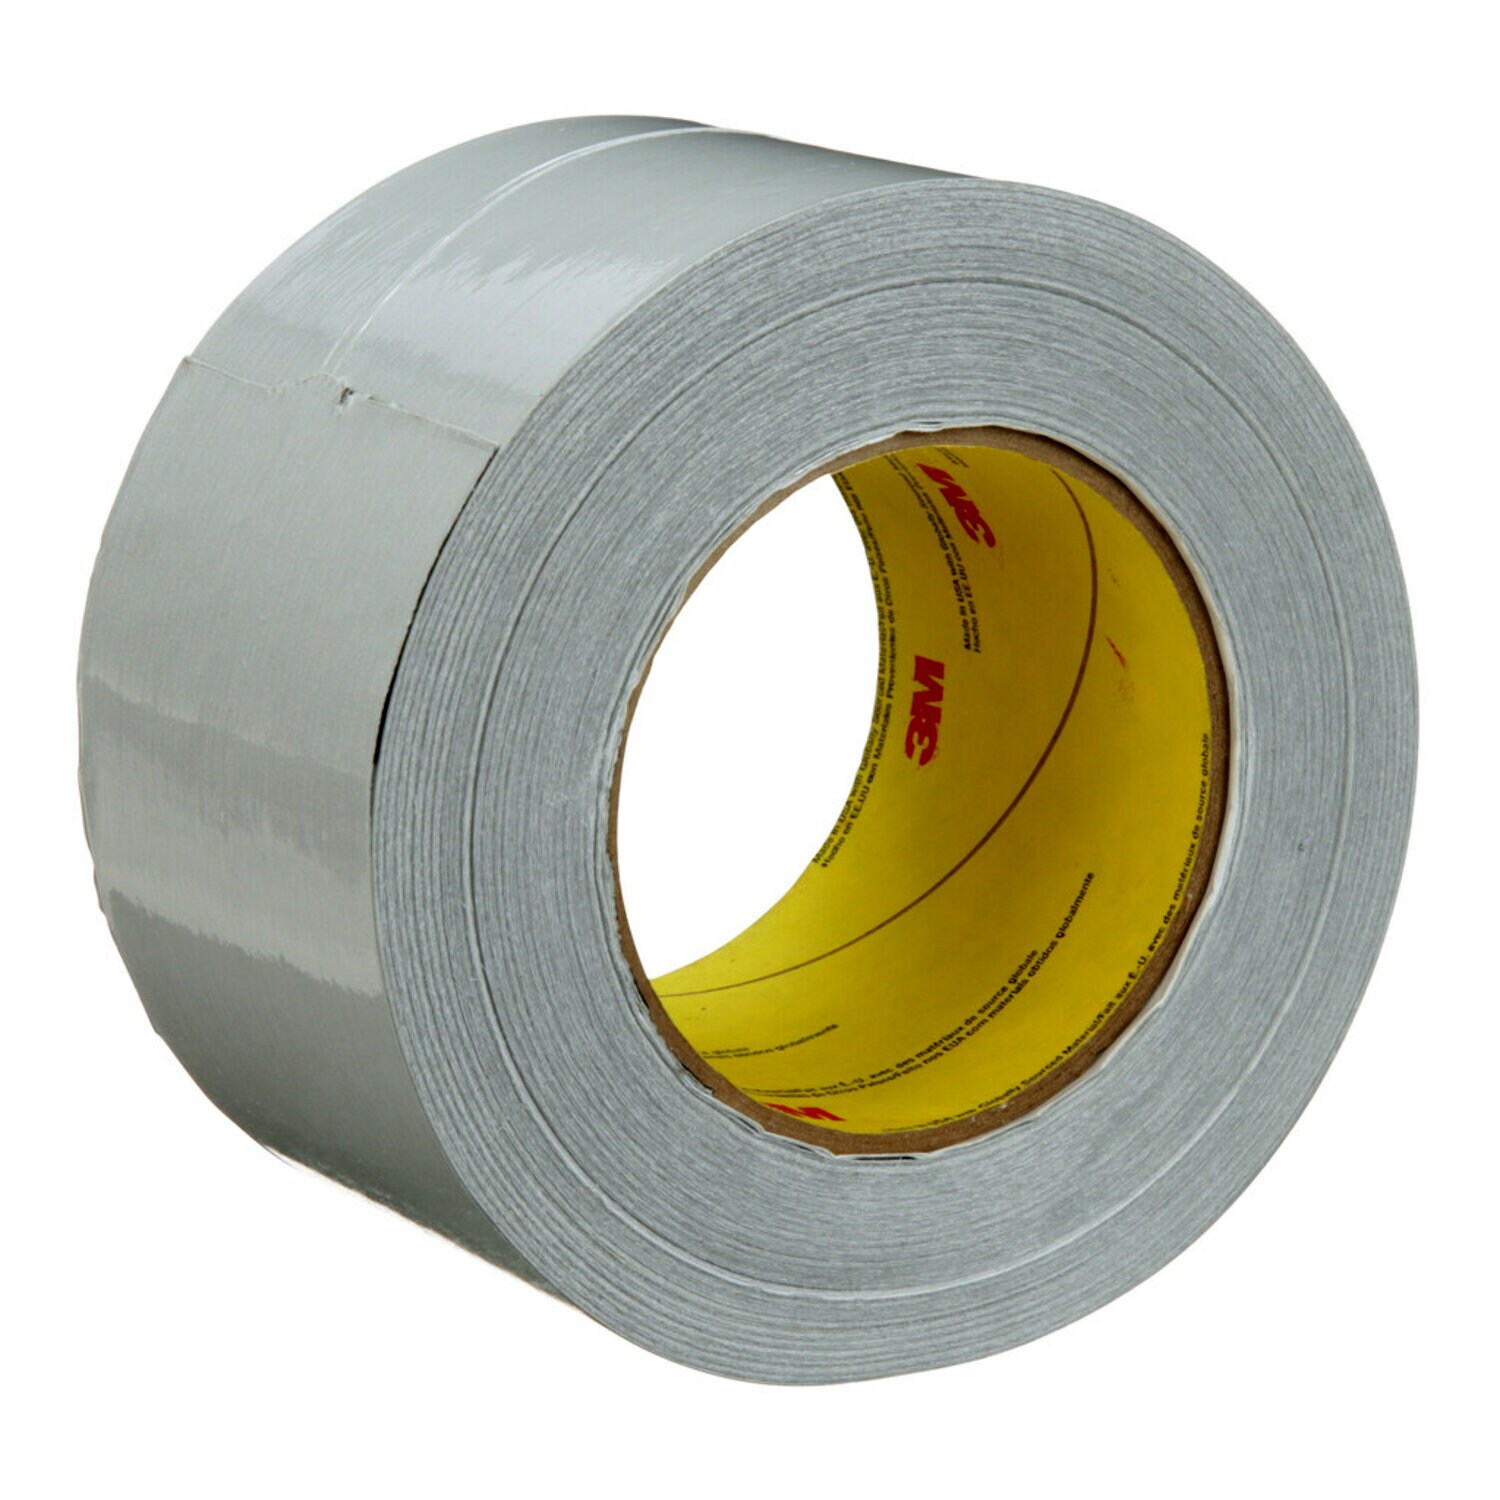 https://www.e-aircraftsupply.com/ItemImages/17/2178079E_3m-venture-tape-cryogenic-vapor-barrier-tape-1555cw-silver-72-mm-x-45-7-m-16-rolls-per-case.jpg